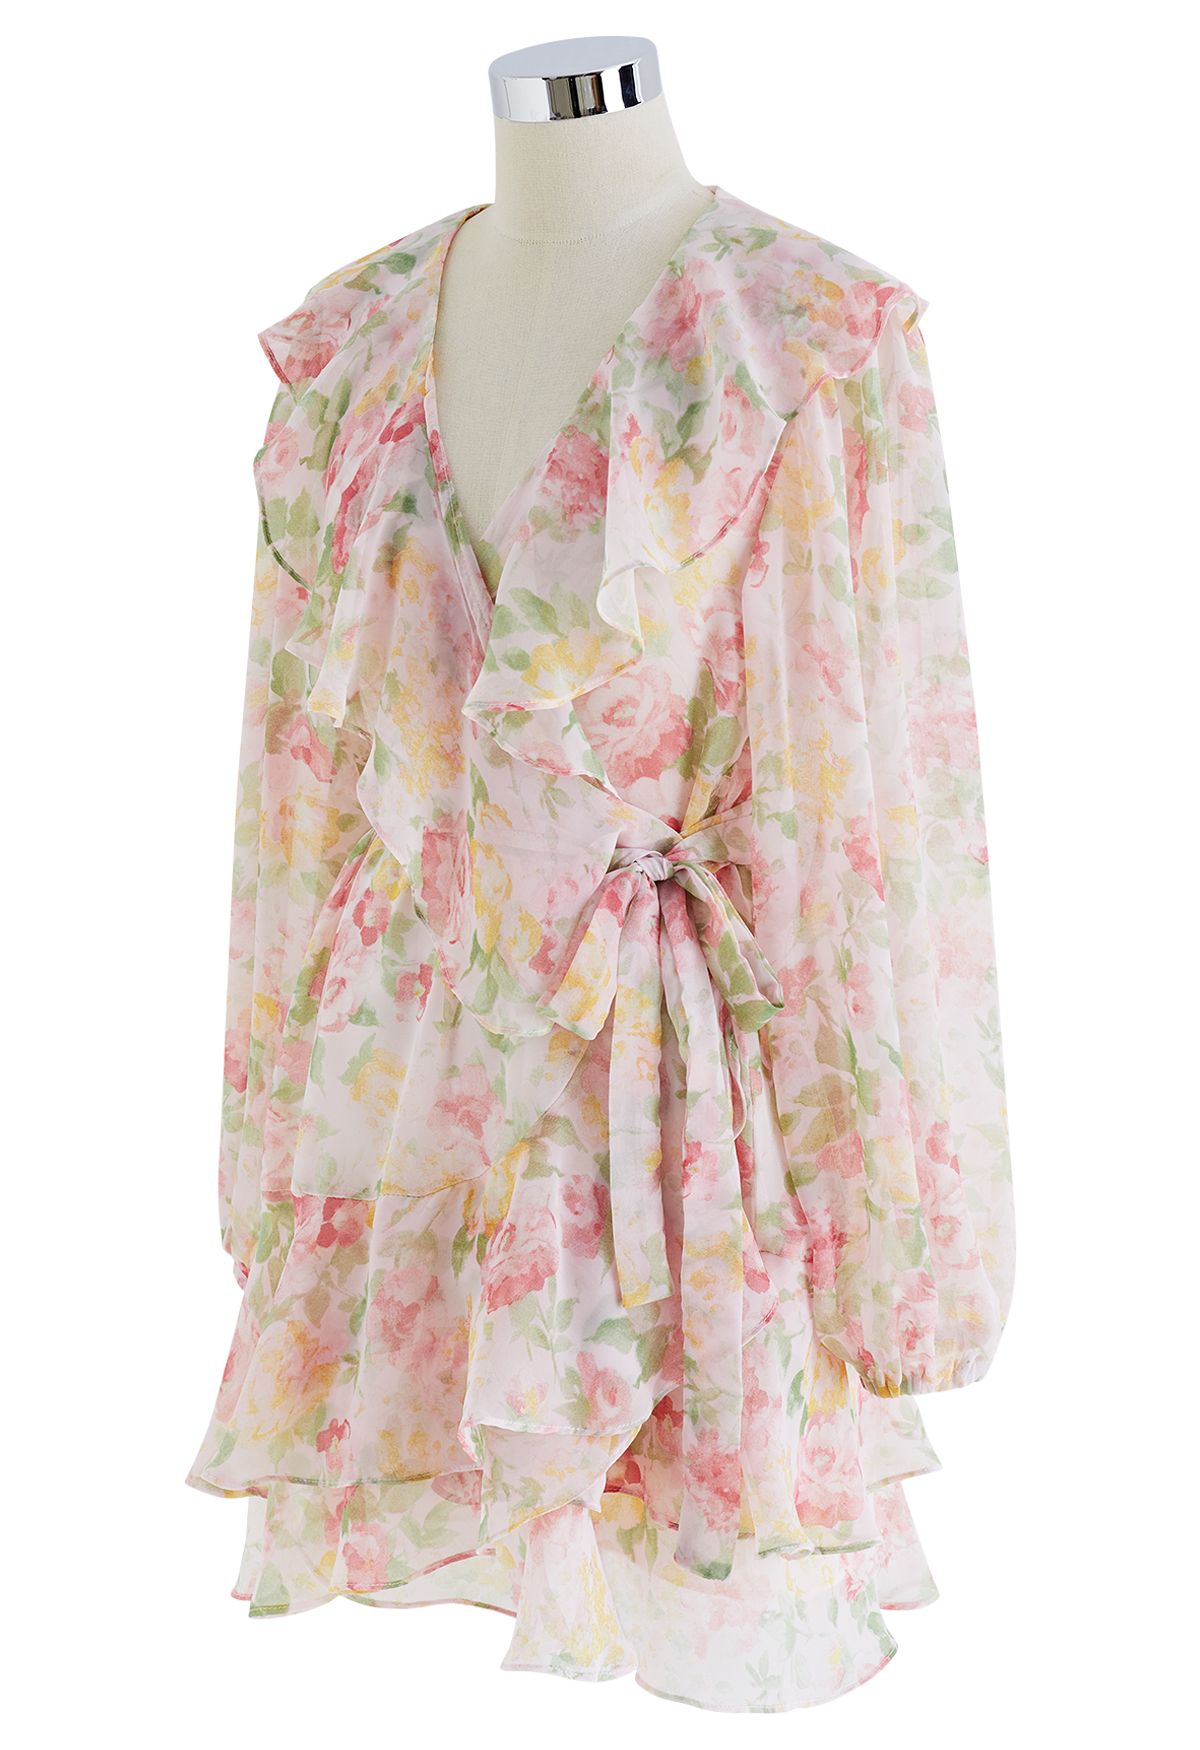 Sweet Bloom Ruffle Wrap Mini Dress in Pink - Retro, Indie and Unique ...